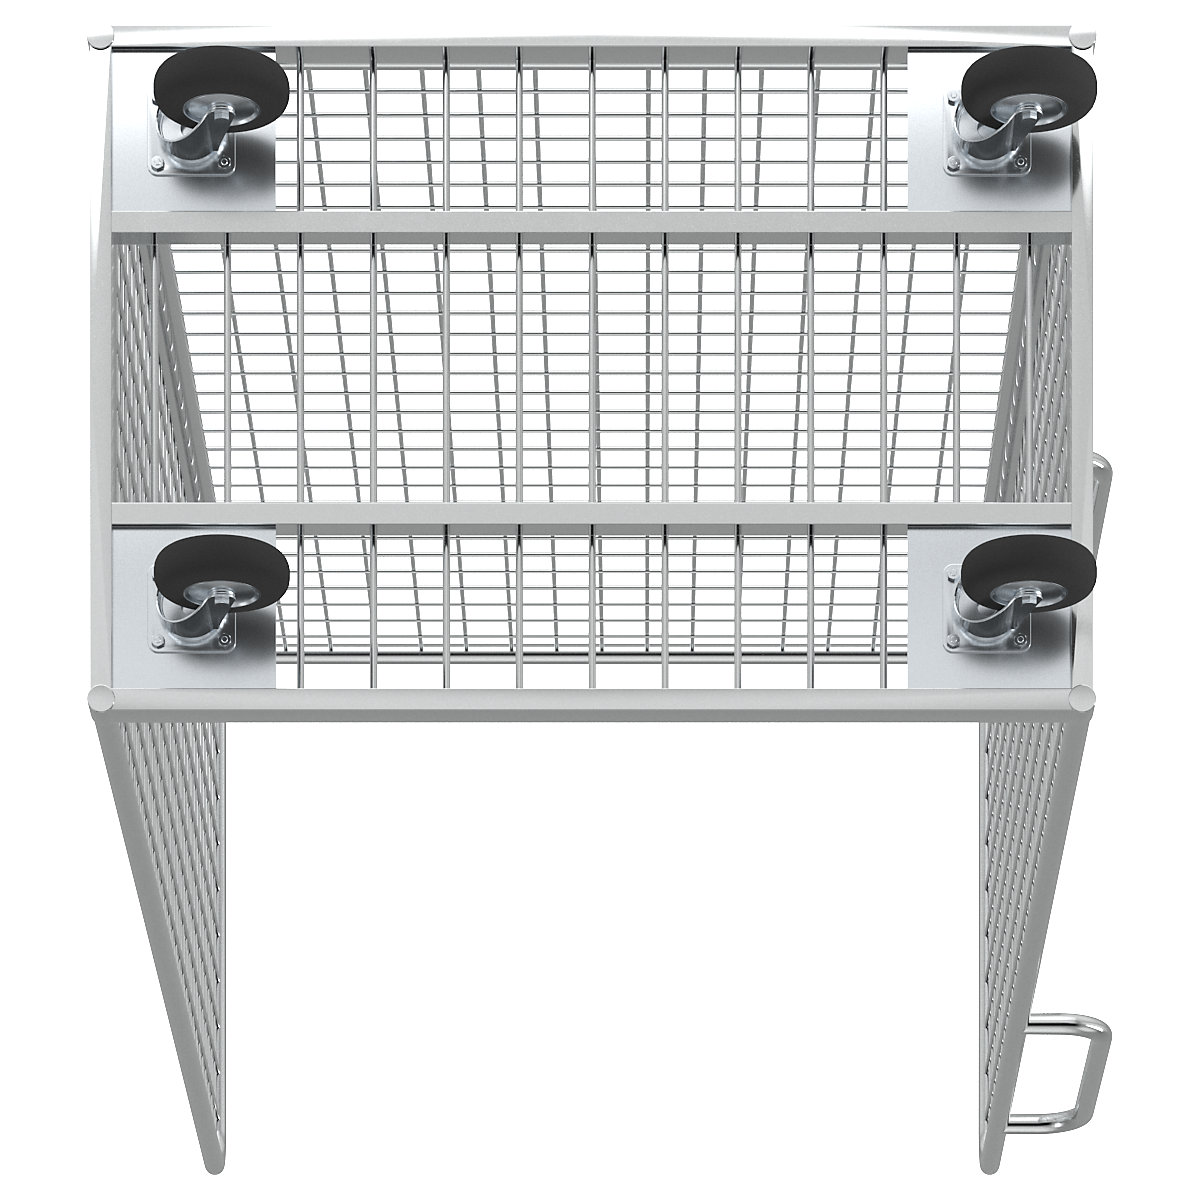 Order picking trolley (Product illustration 2)-1